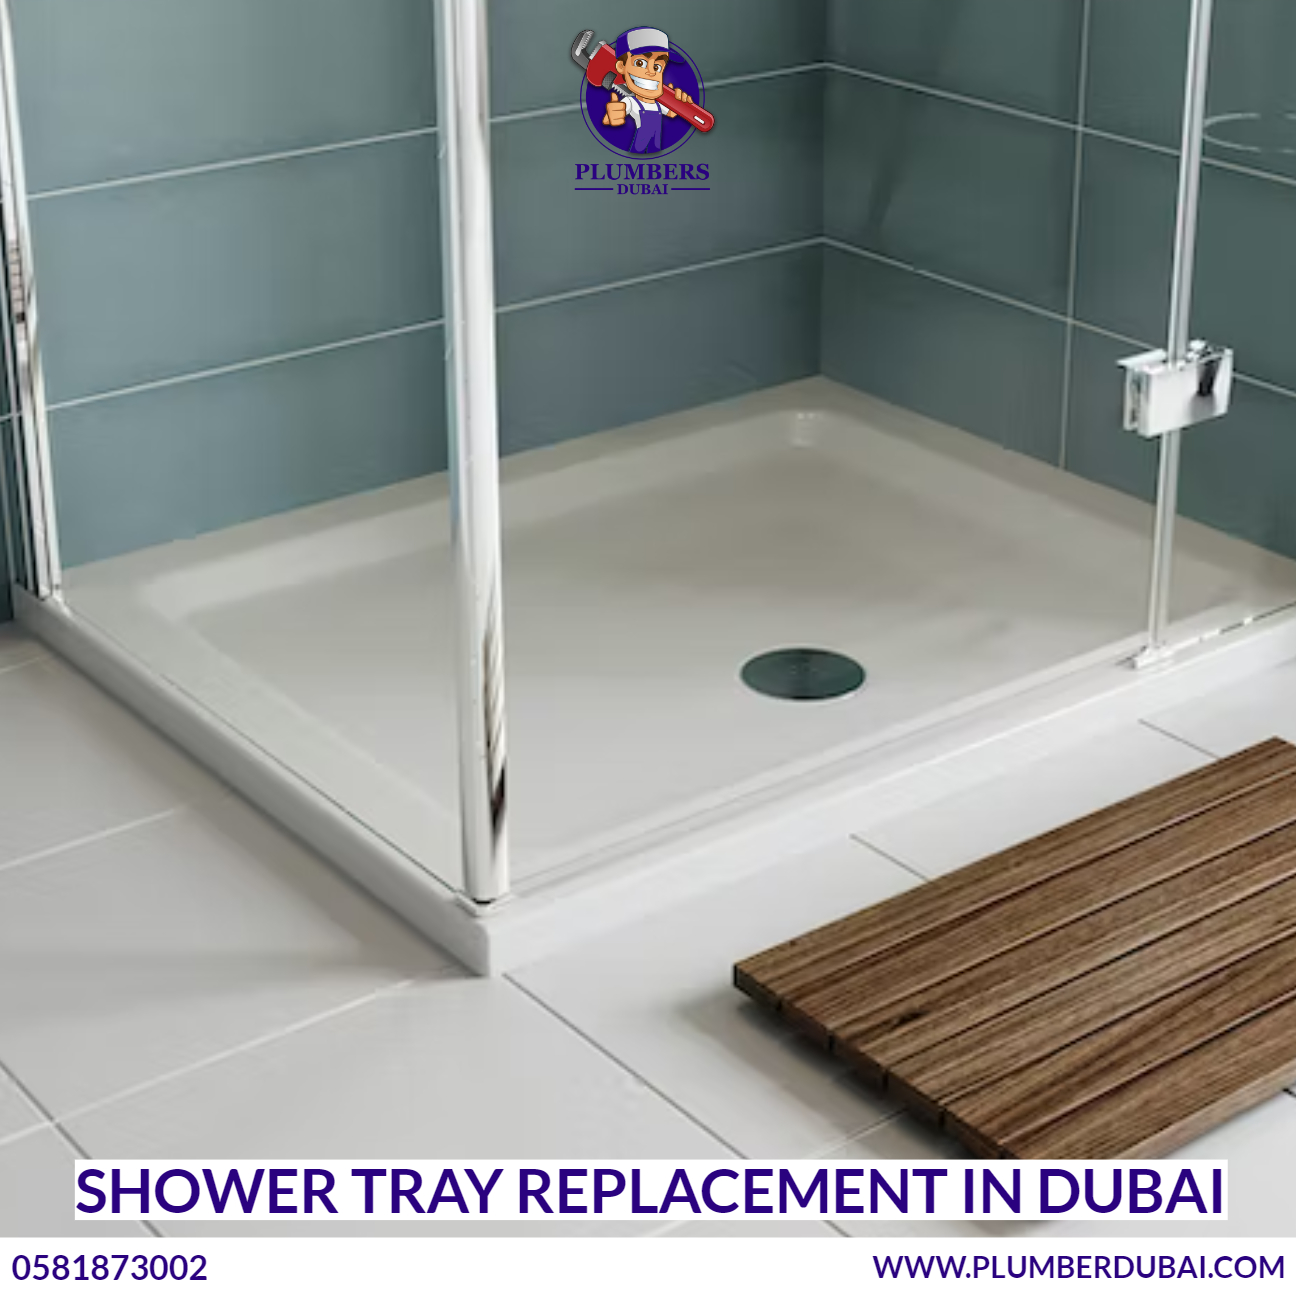 Shower Tray Replacement in Dubai